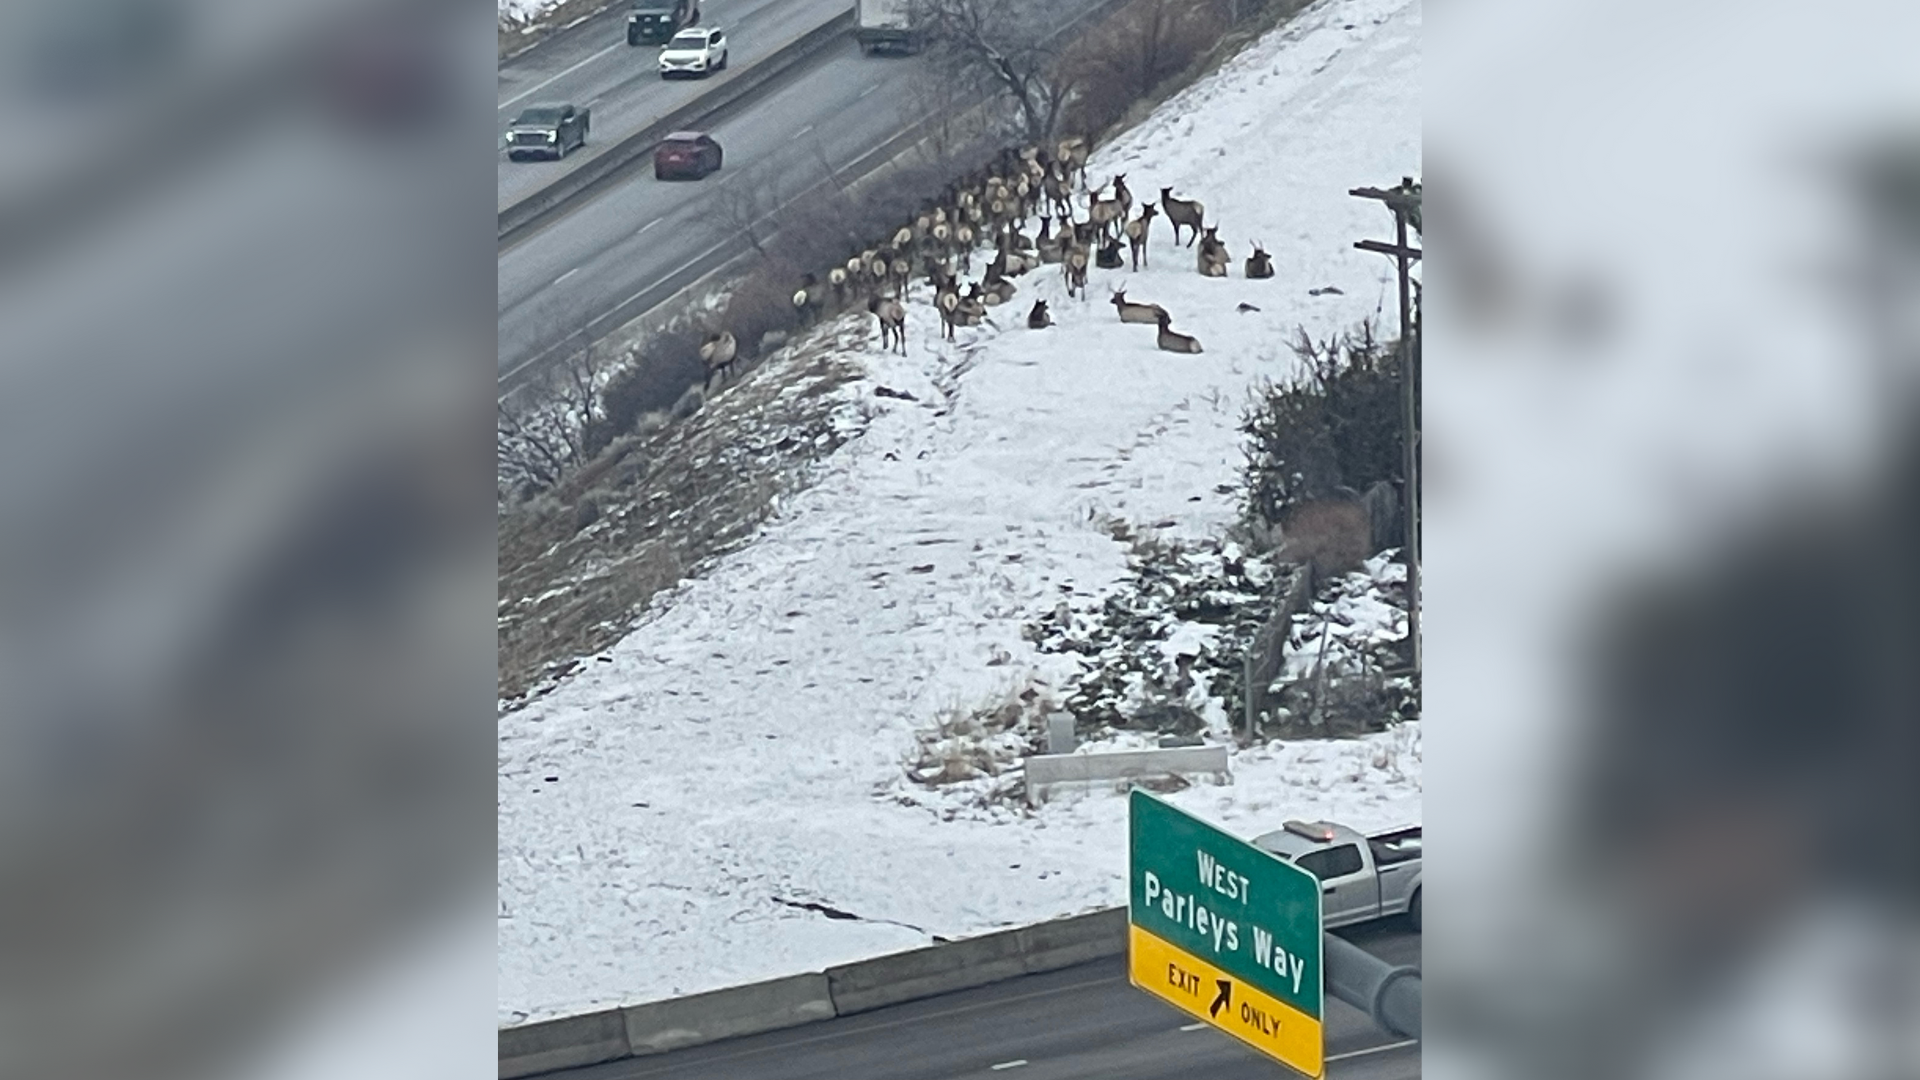 A herd of elk was crossing lanes of westbound I-80 in Salt Lake City on Thursday....